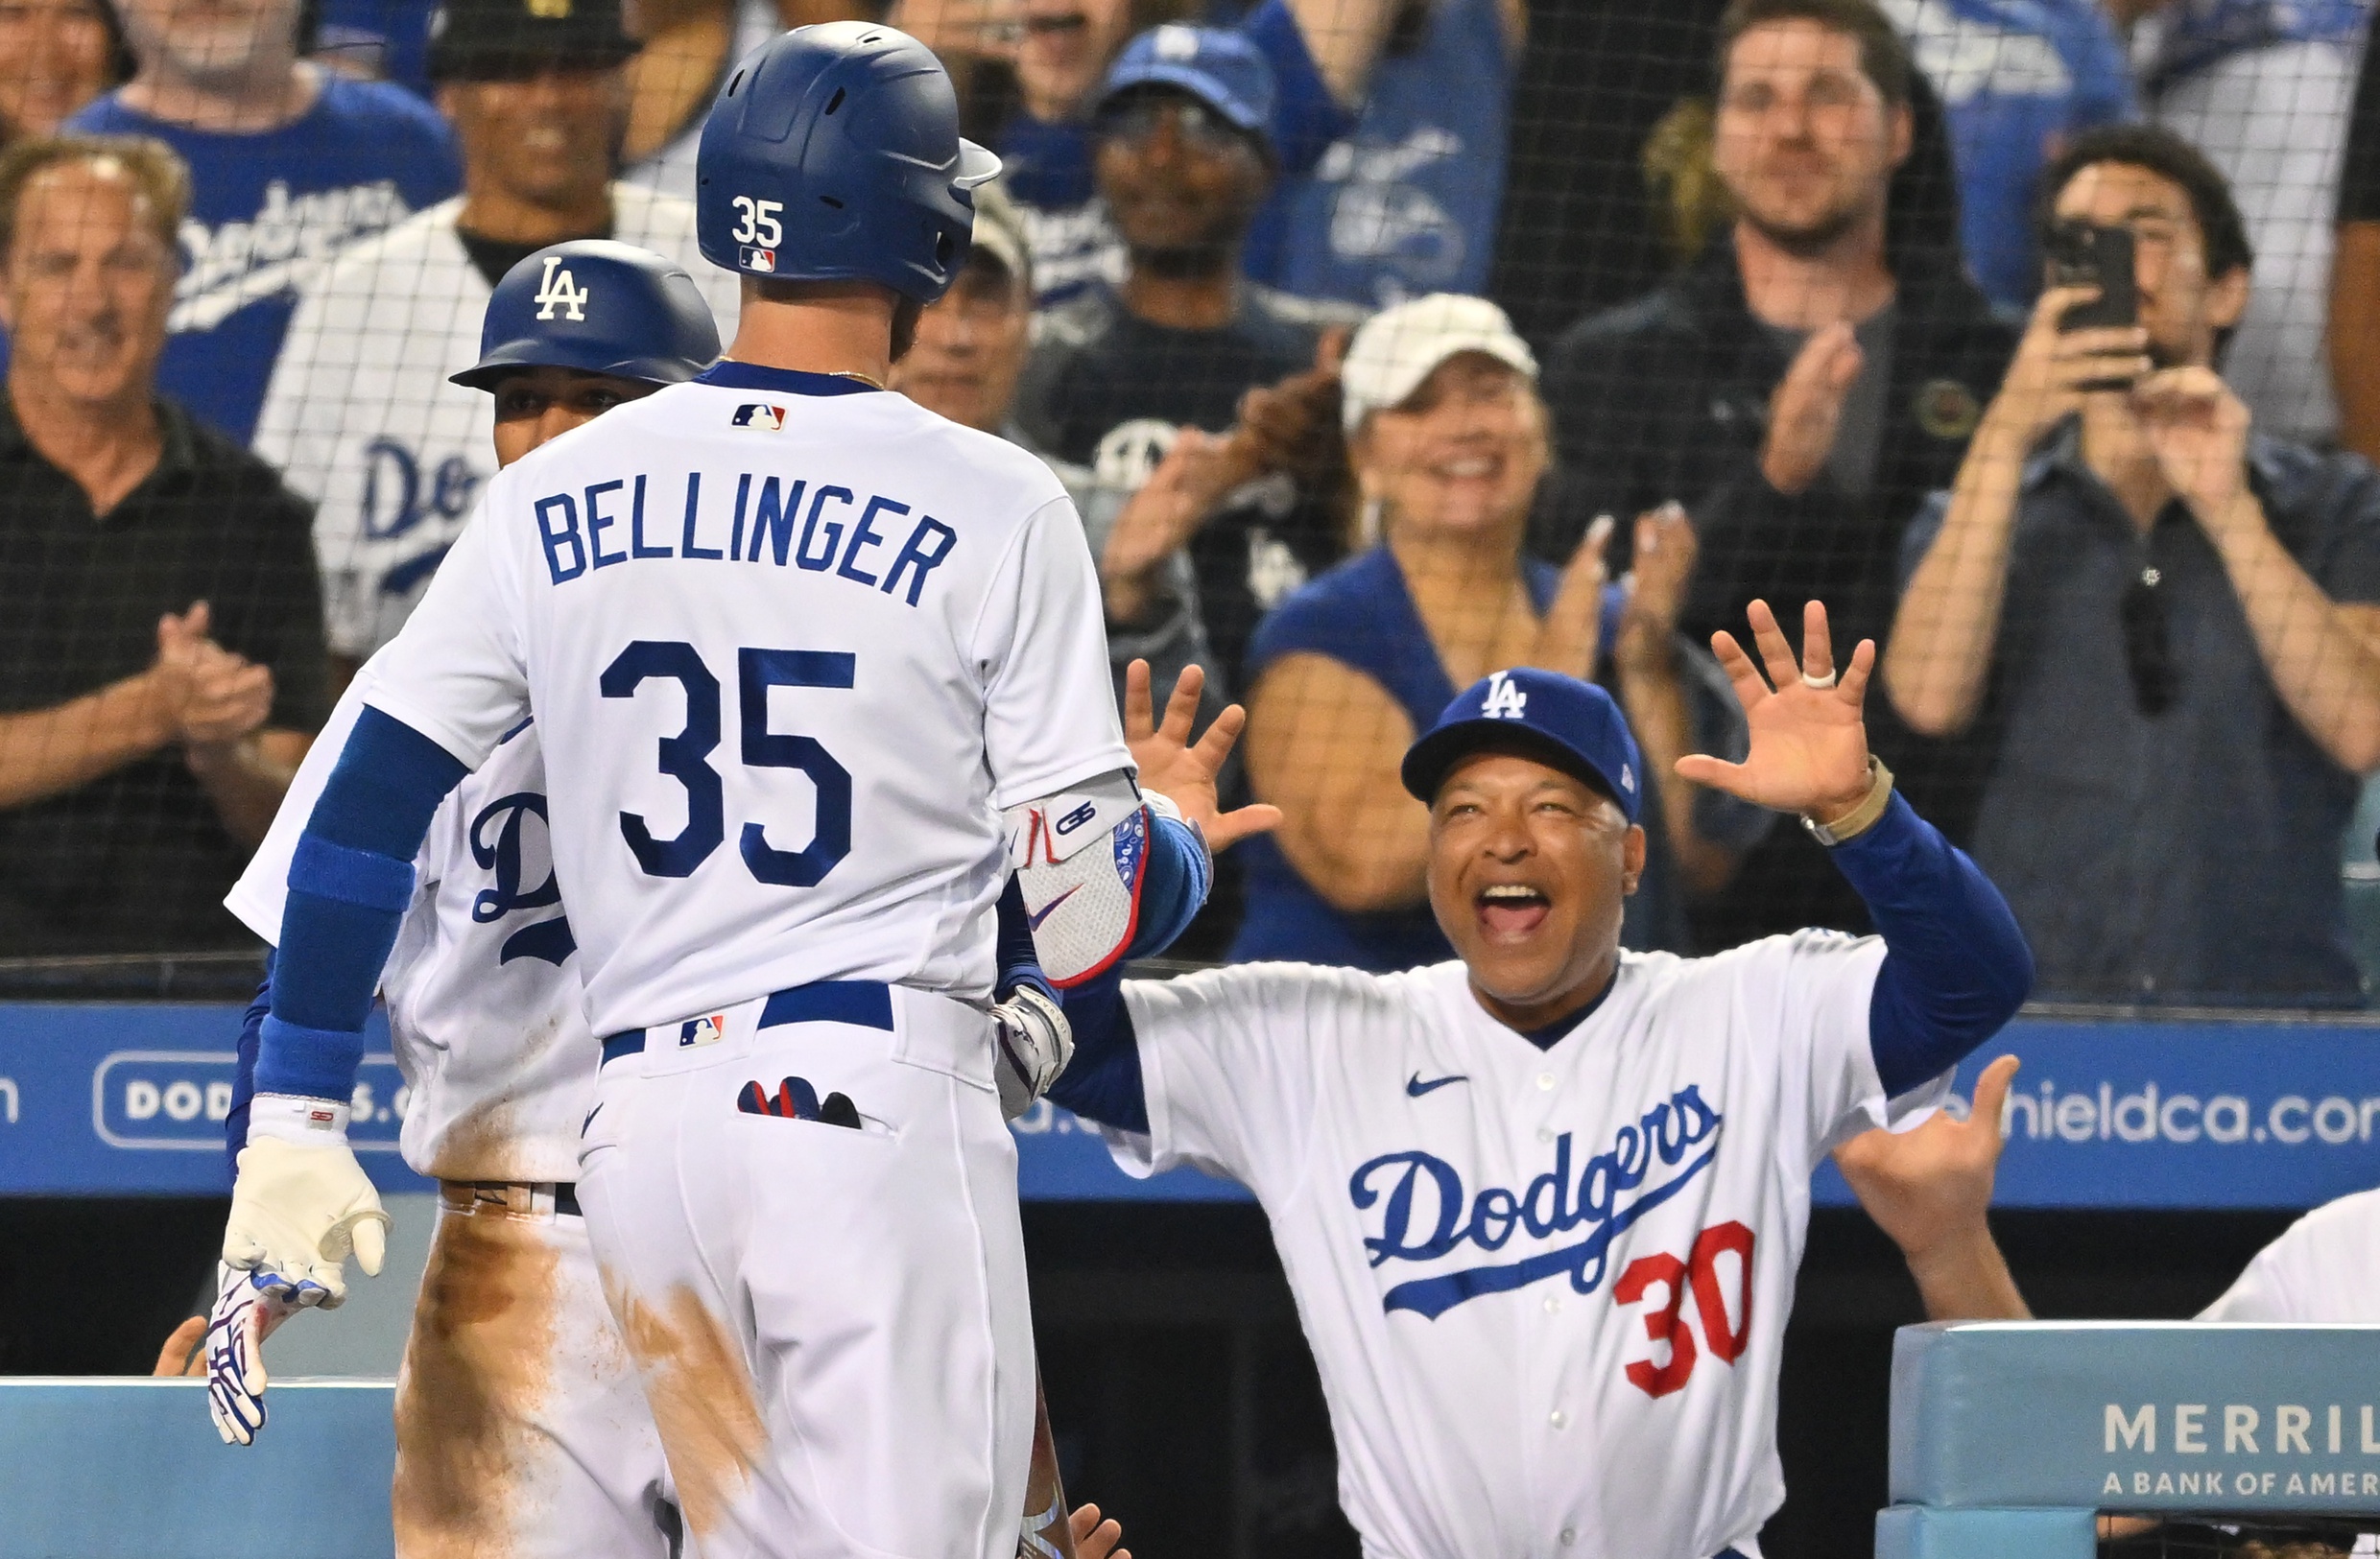 Cody Bellinger has close group of HS friends